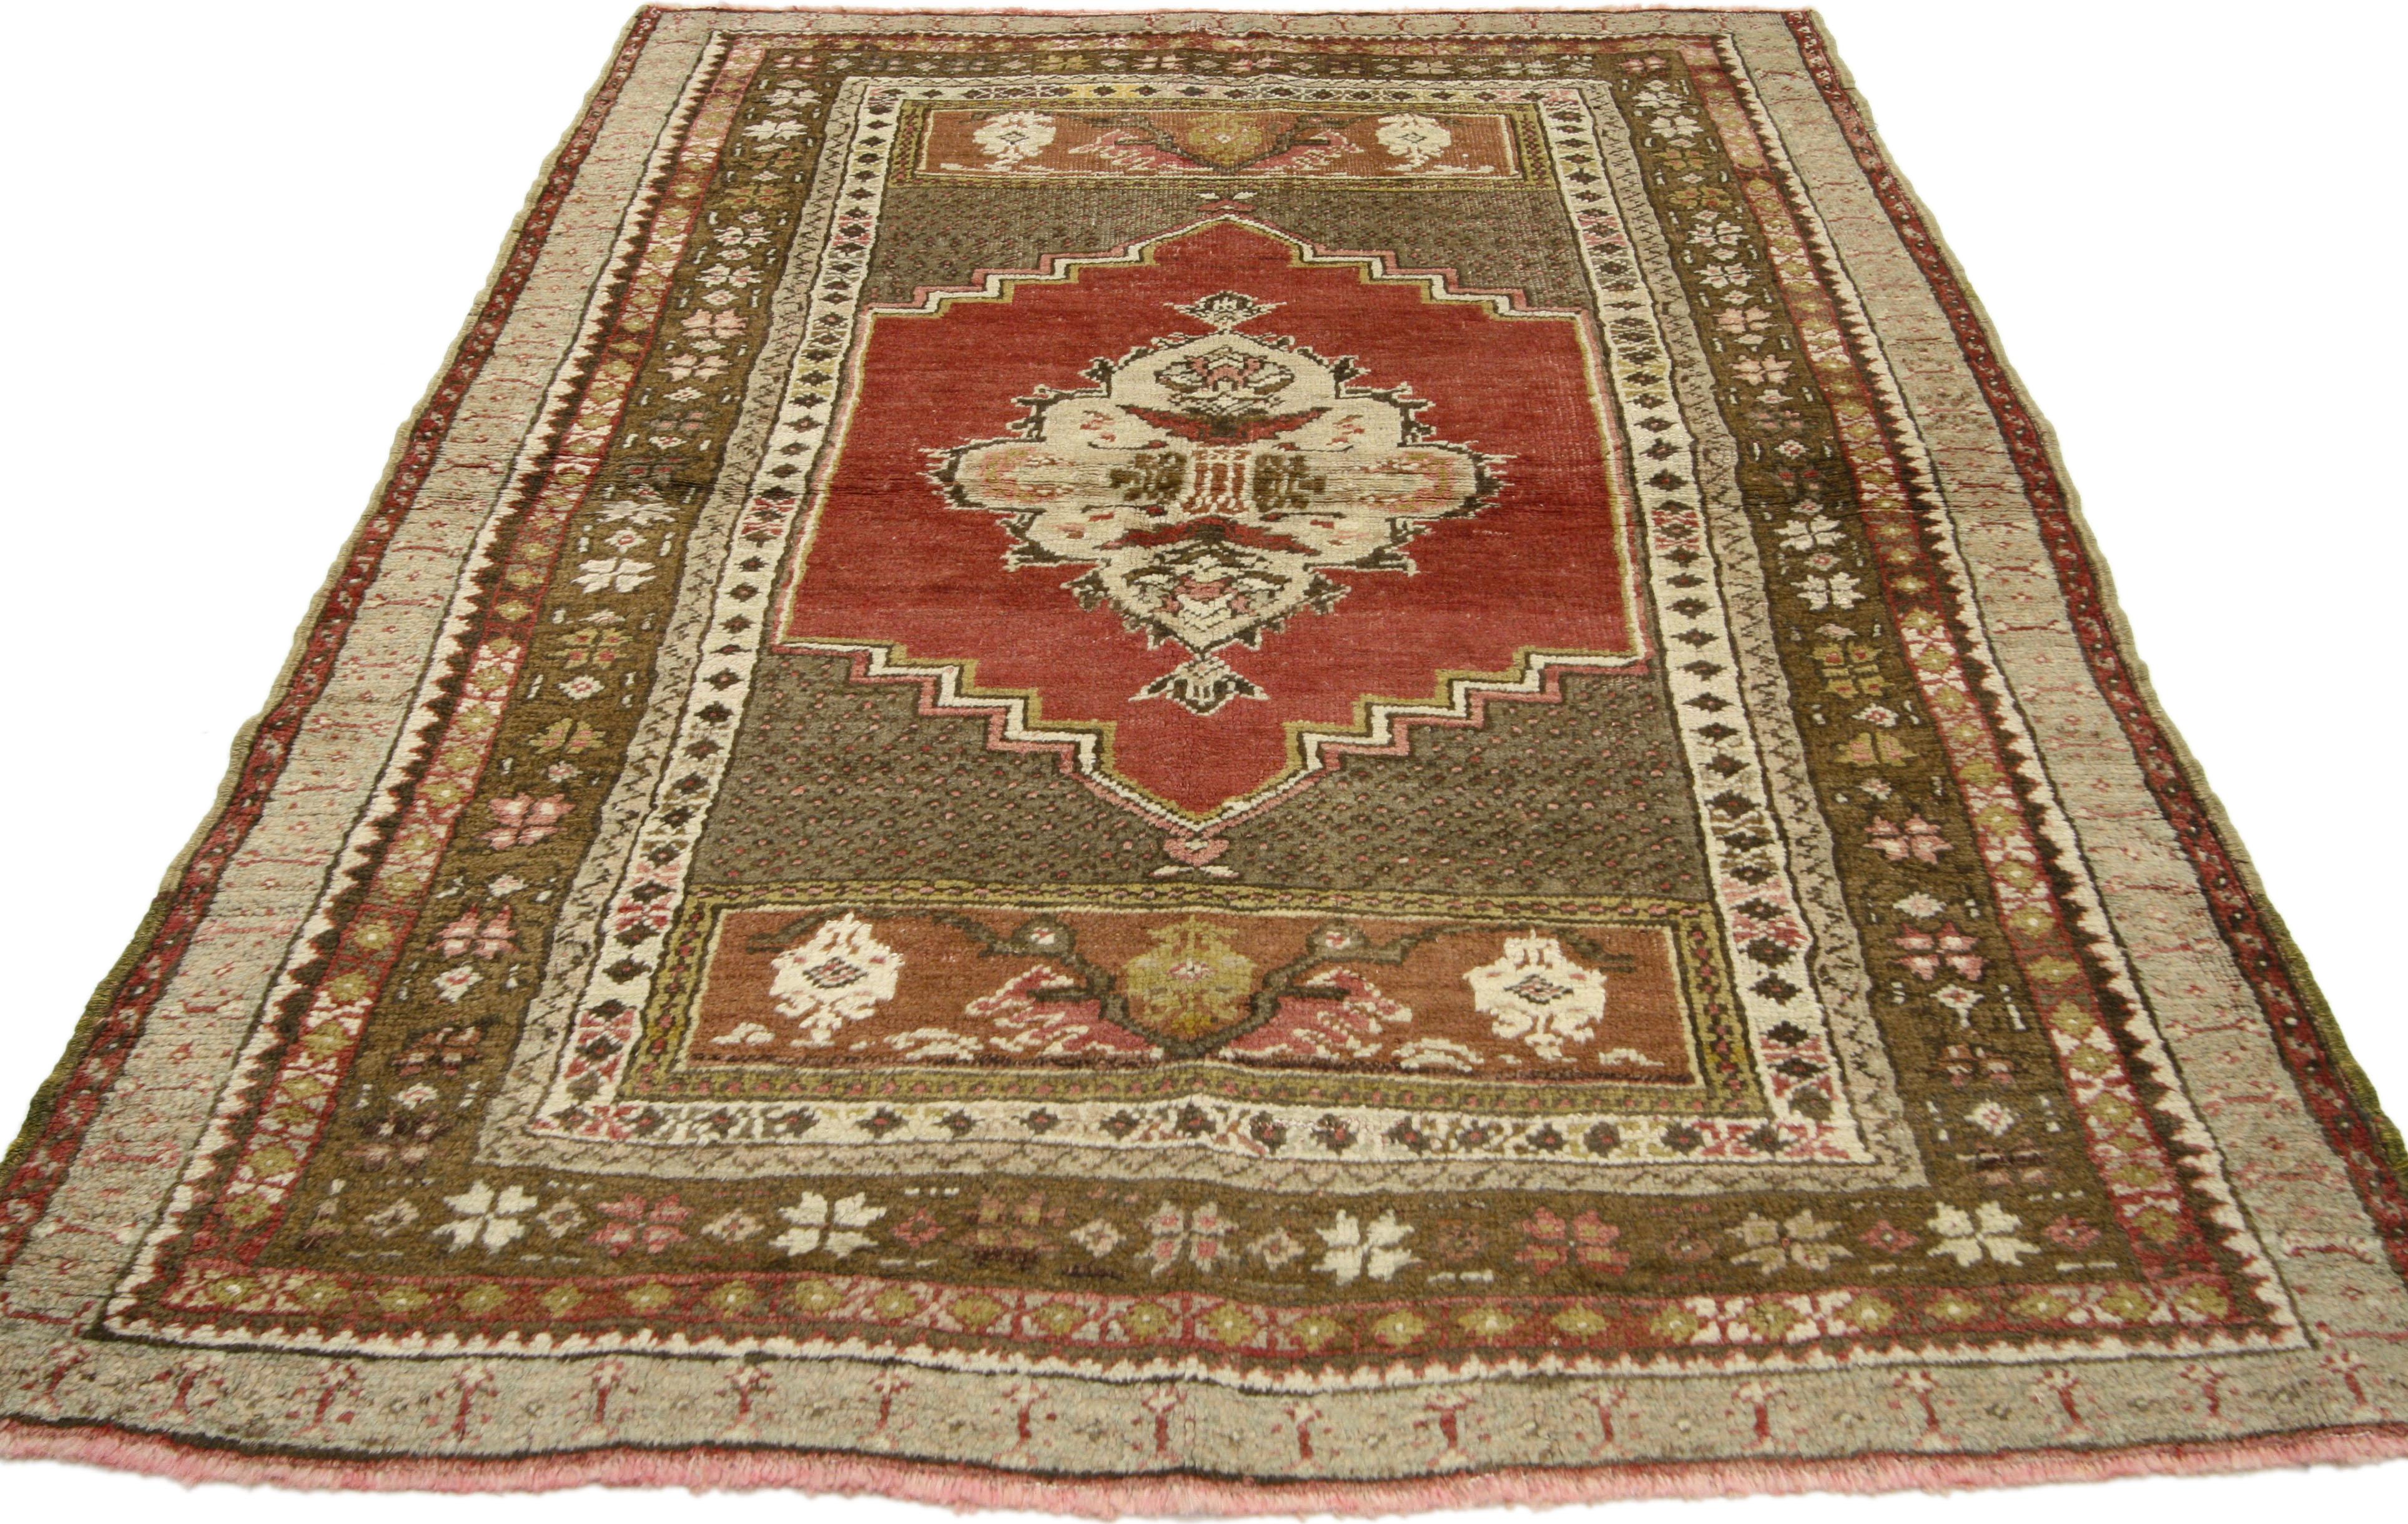 50121, a vintage Turkish Oushak rug with traditional style. This unique Turkish Oushak accent rug features a central geometric medallion of cream with a pair of lush palmettes floating on an abrashed red field outlined in a stair stepped pattern.